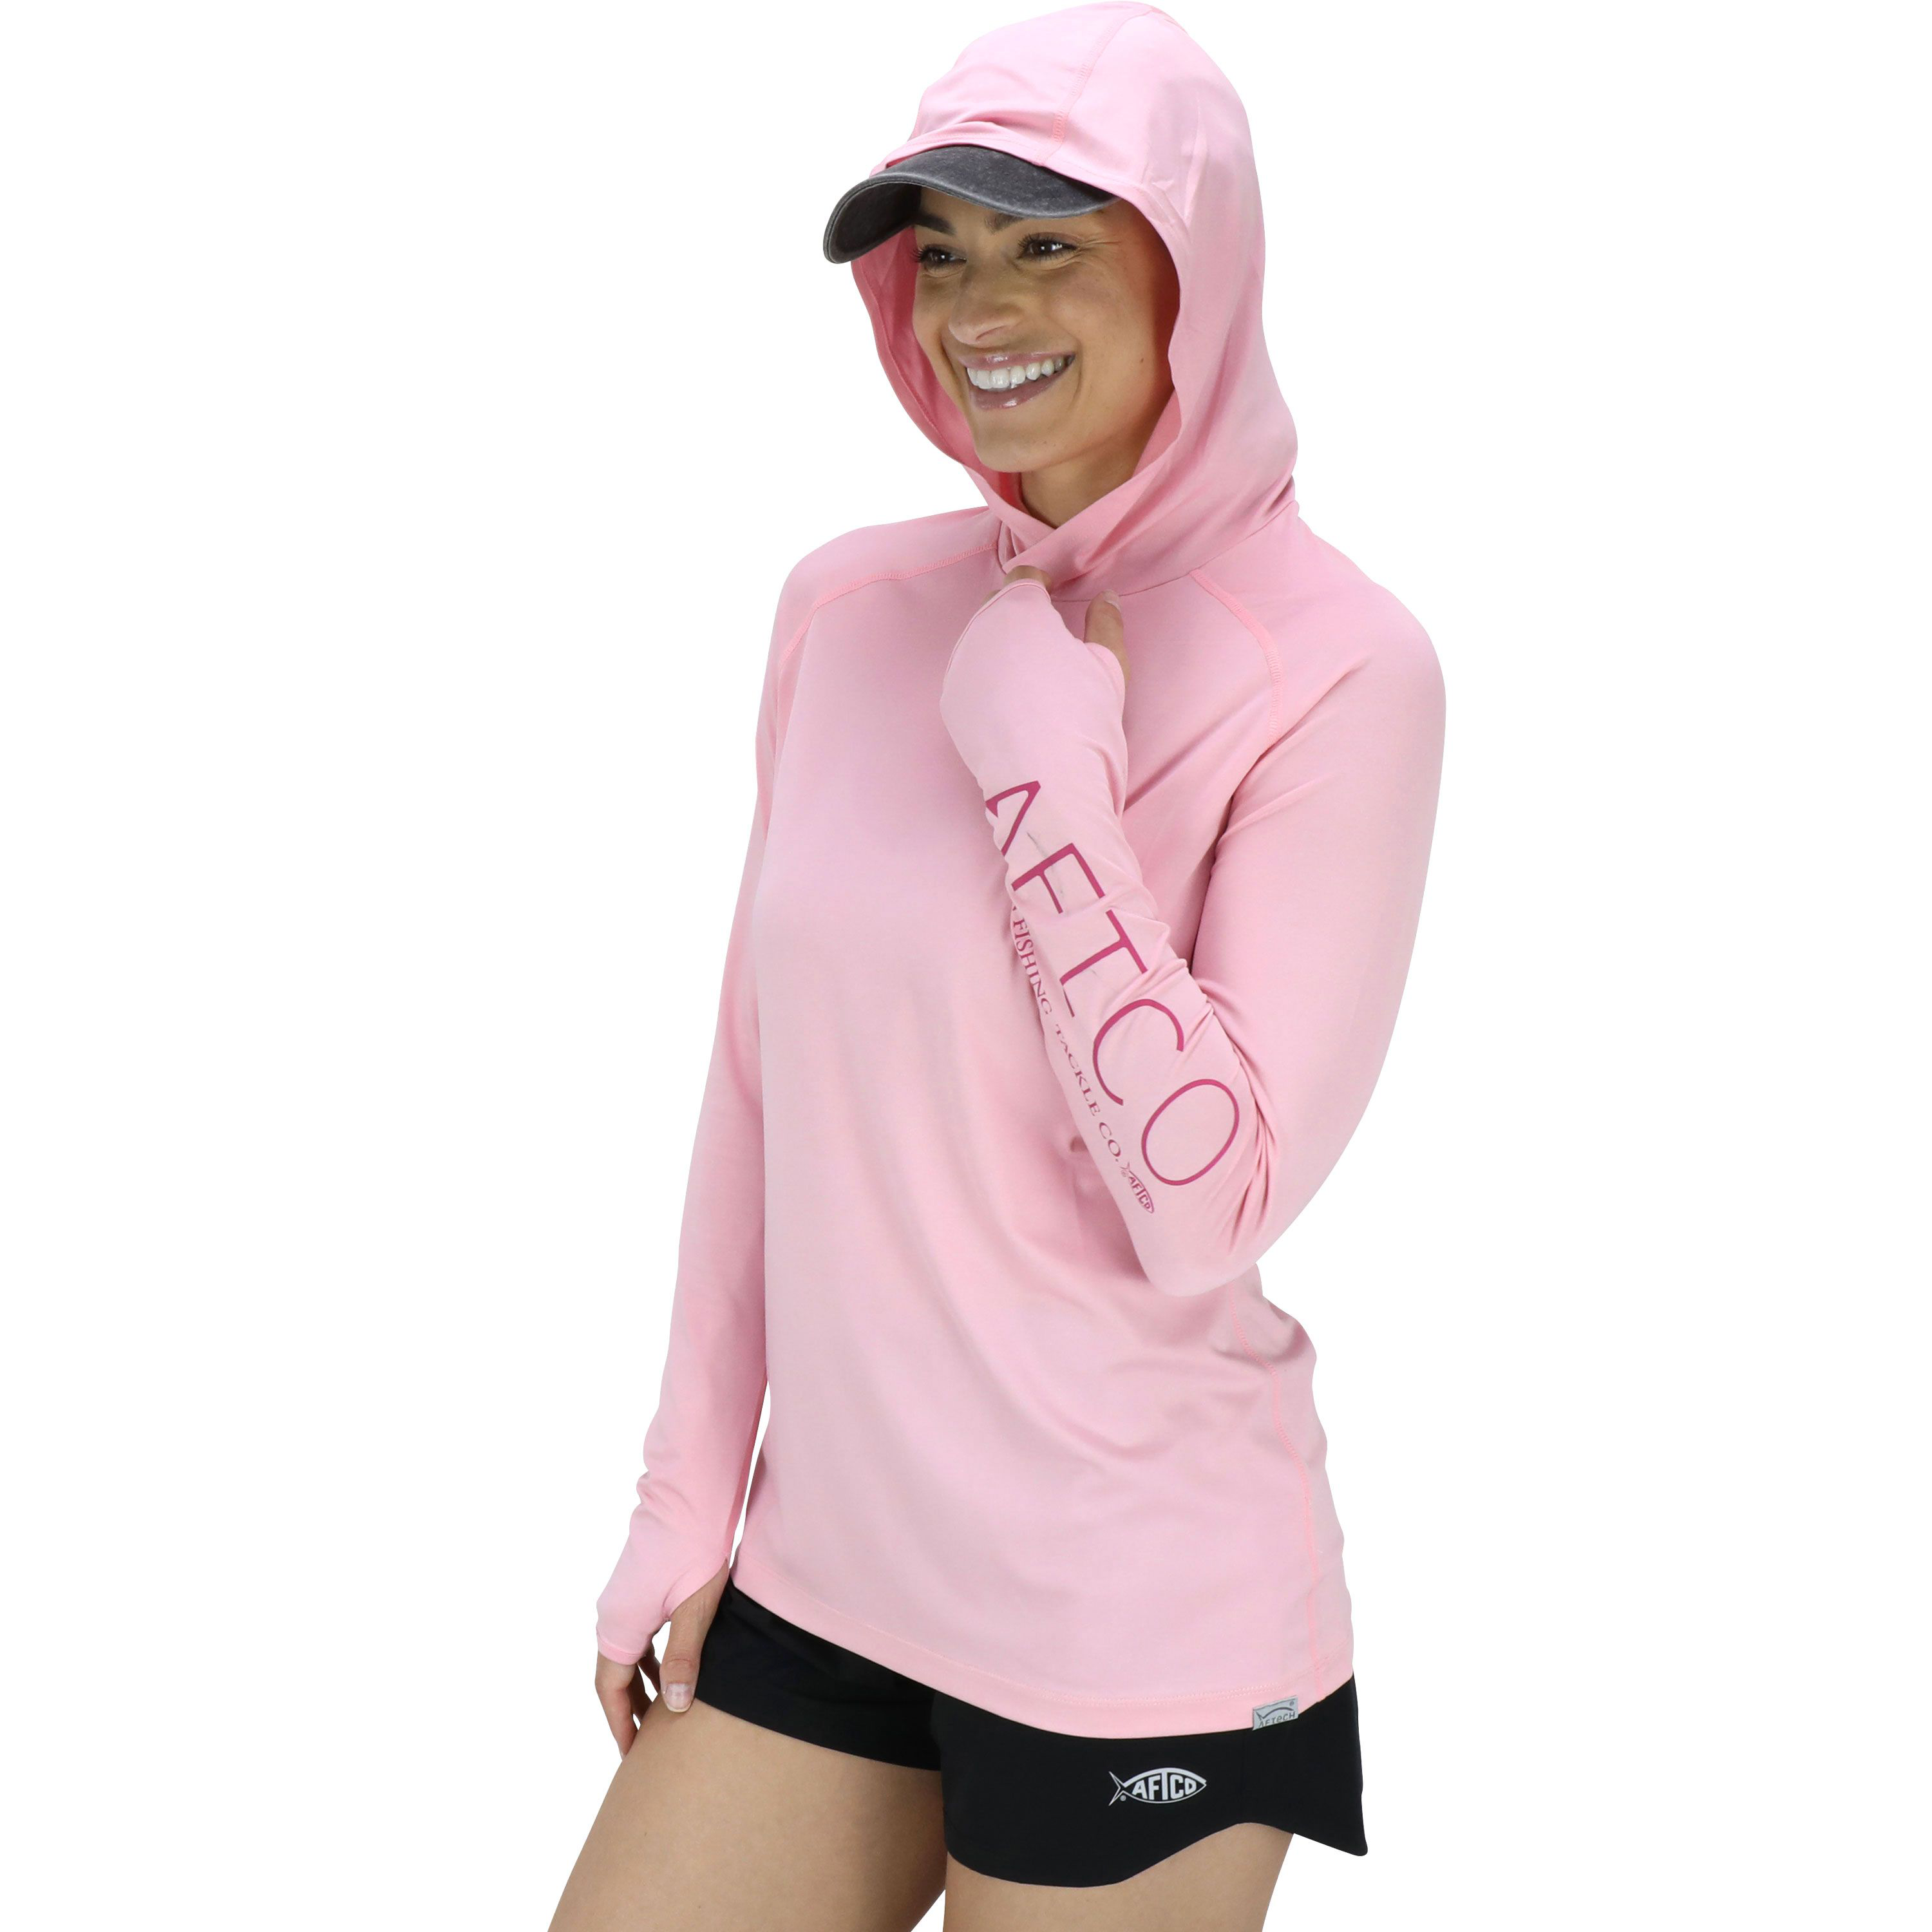 AFTCO Women's Samurai Hooded Sun Protection Shirt - Long Sleeve - Orchid Pink Heather